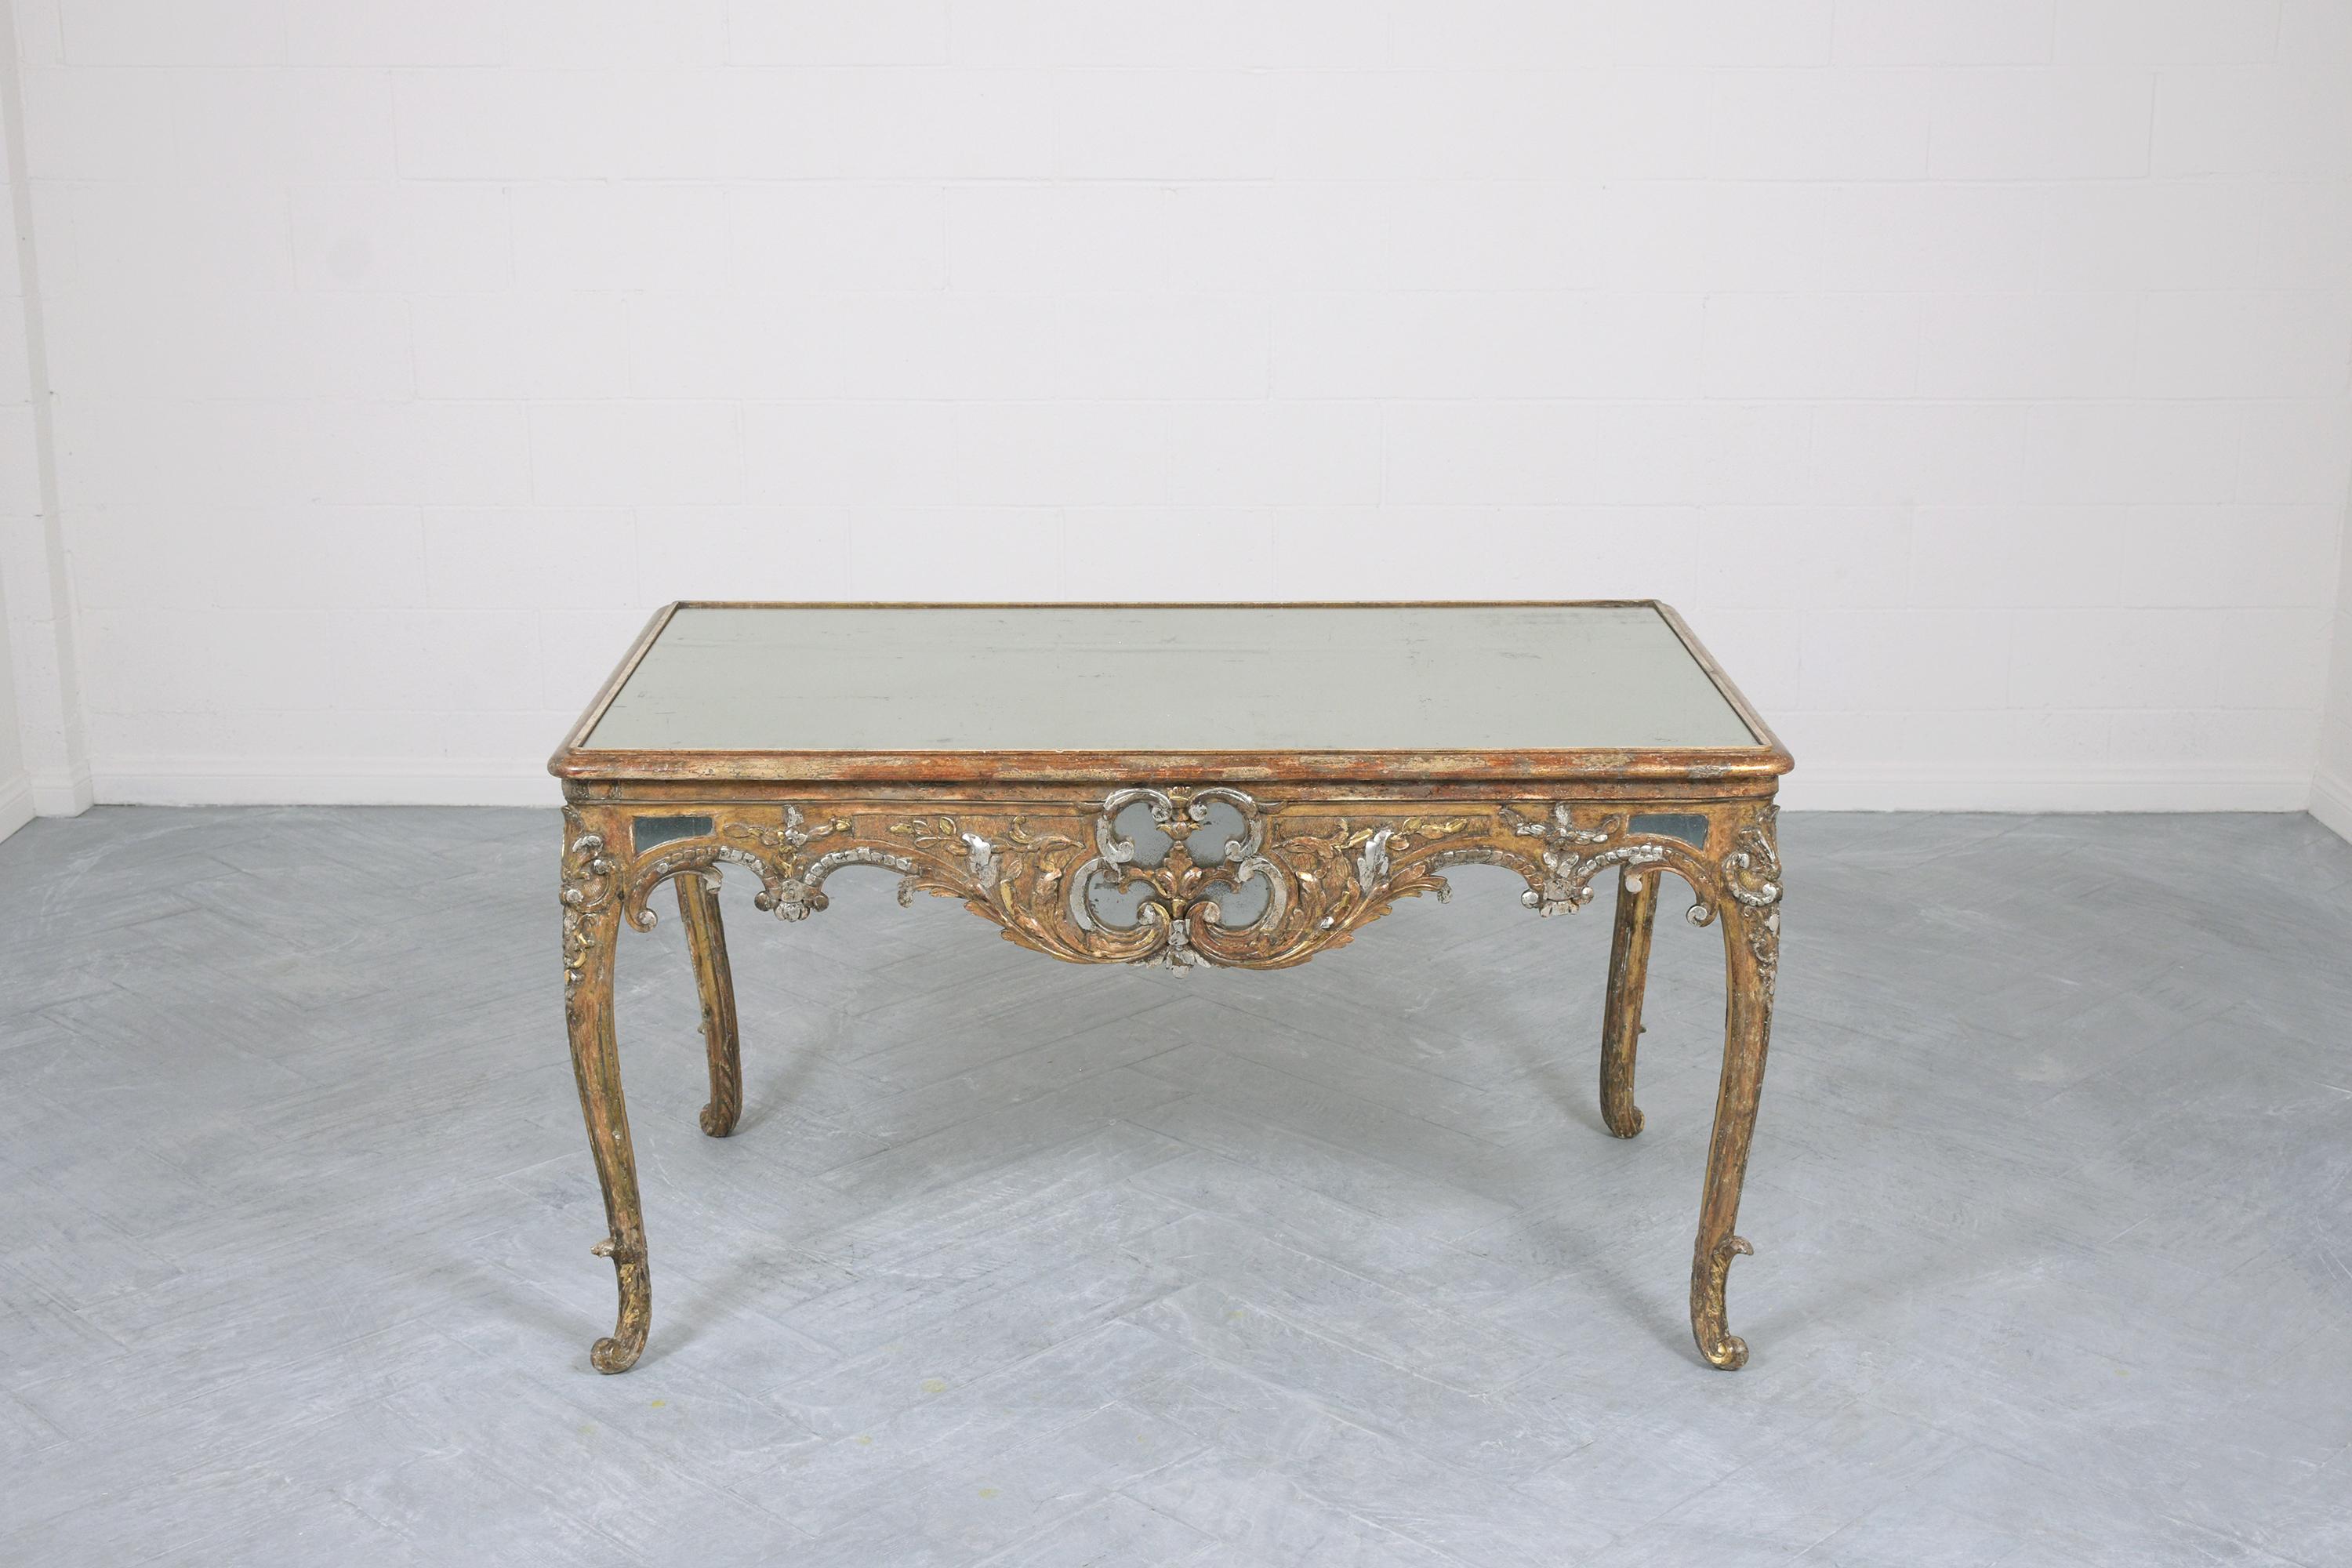 Immerse yourself in the grandeur of the past with our 19th-century Louis XVI center table, a breathtaking example of historical craftsmanship. Lovingly restored by our dedicated team, this table is a stunning piece of artistry and history.